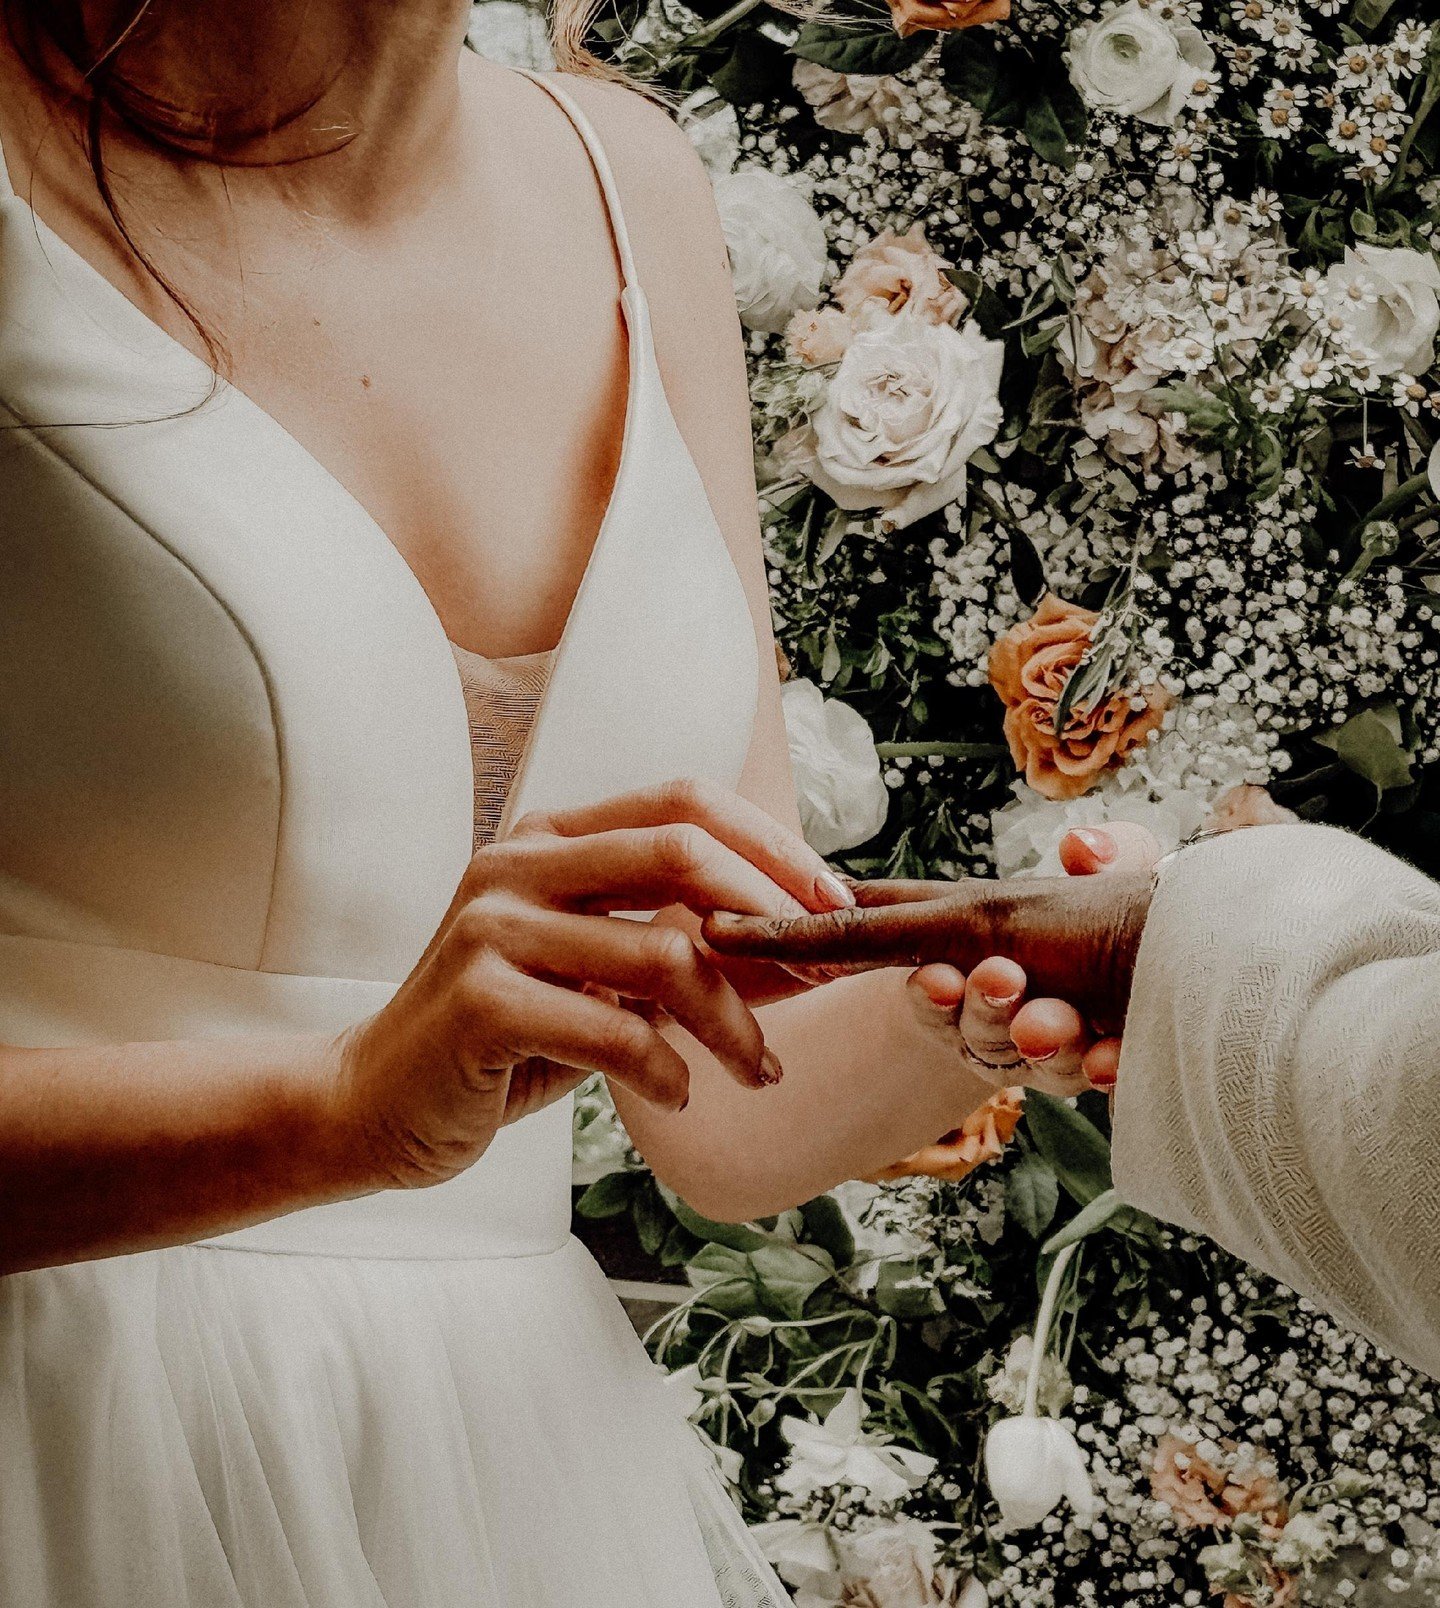 With this ring i promise to.

Concept and Planning: @tomwyatt.co / @kirstygreat.photo 
Photography: @tomwyatt.co / @kirstygreat.photo
Venue: @watersedgewedding
On-the-day coordinator and styling: @ratherbewed Videographer: @bowl.of.corks.photo
Model: